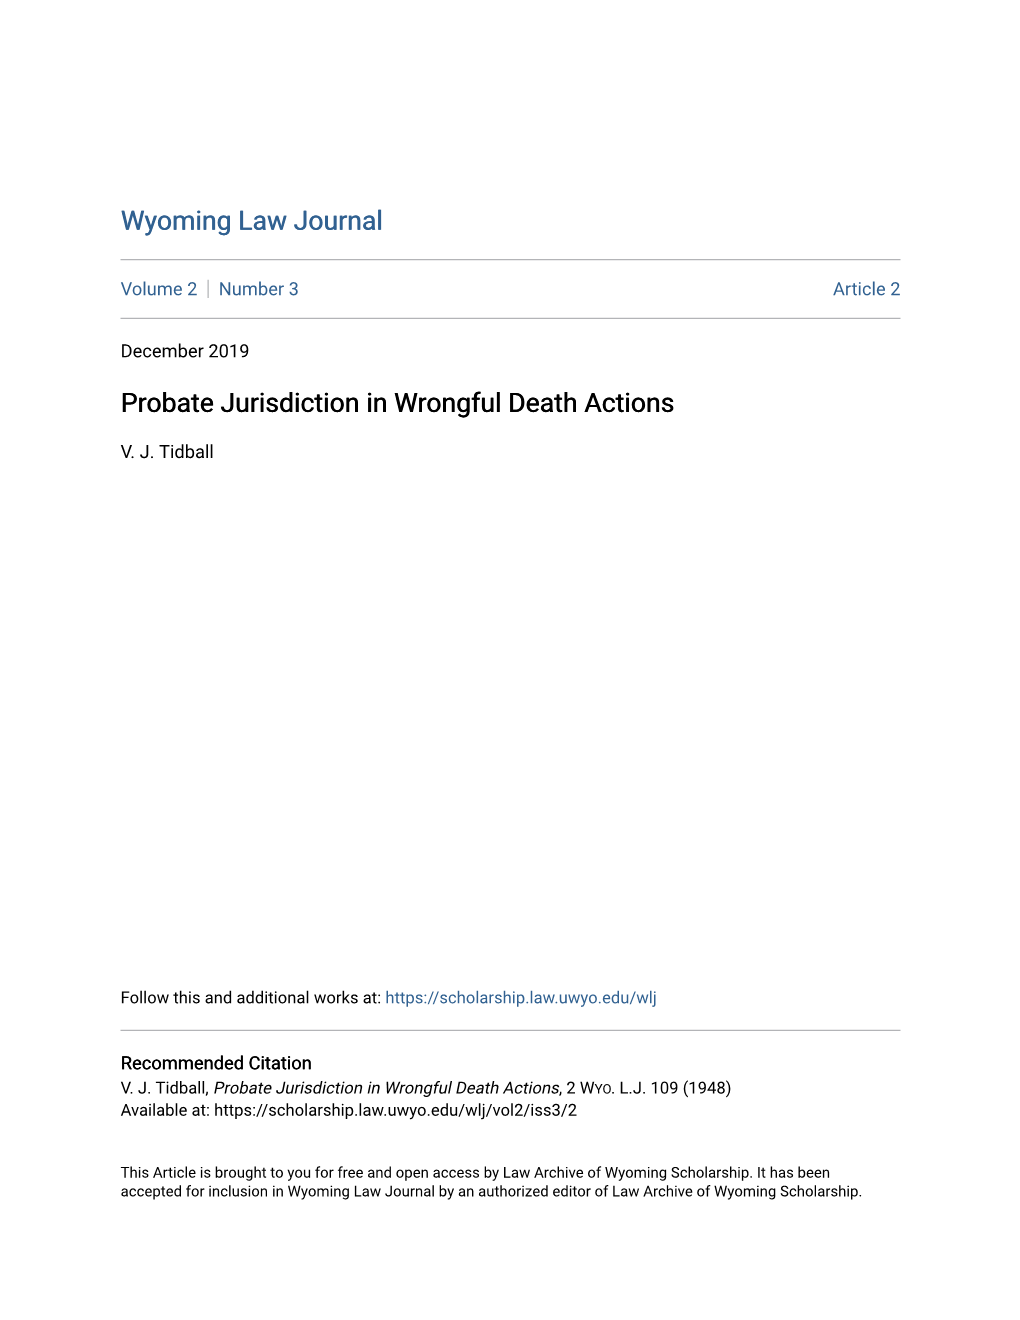 Probate Jurisdiction in Wrongful Death Actions